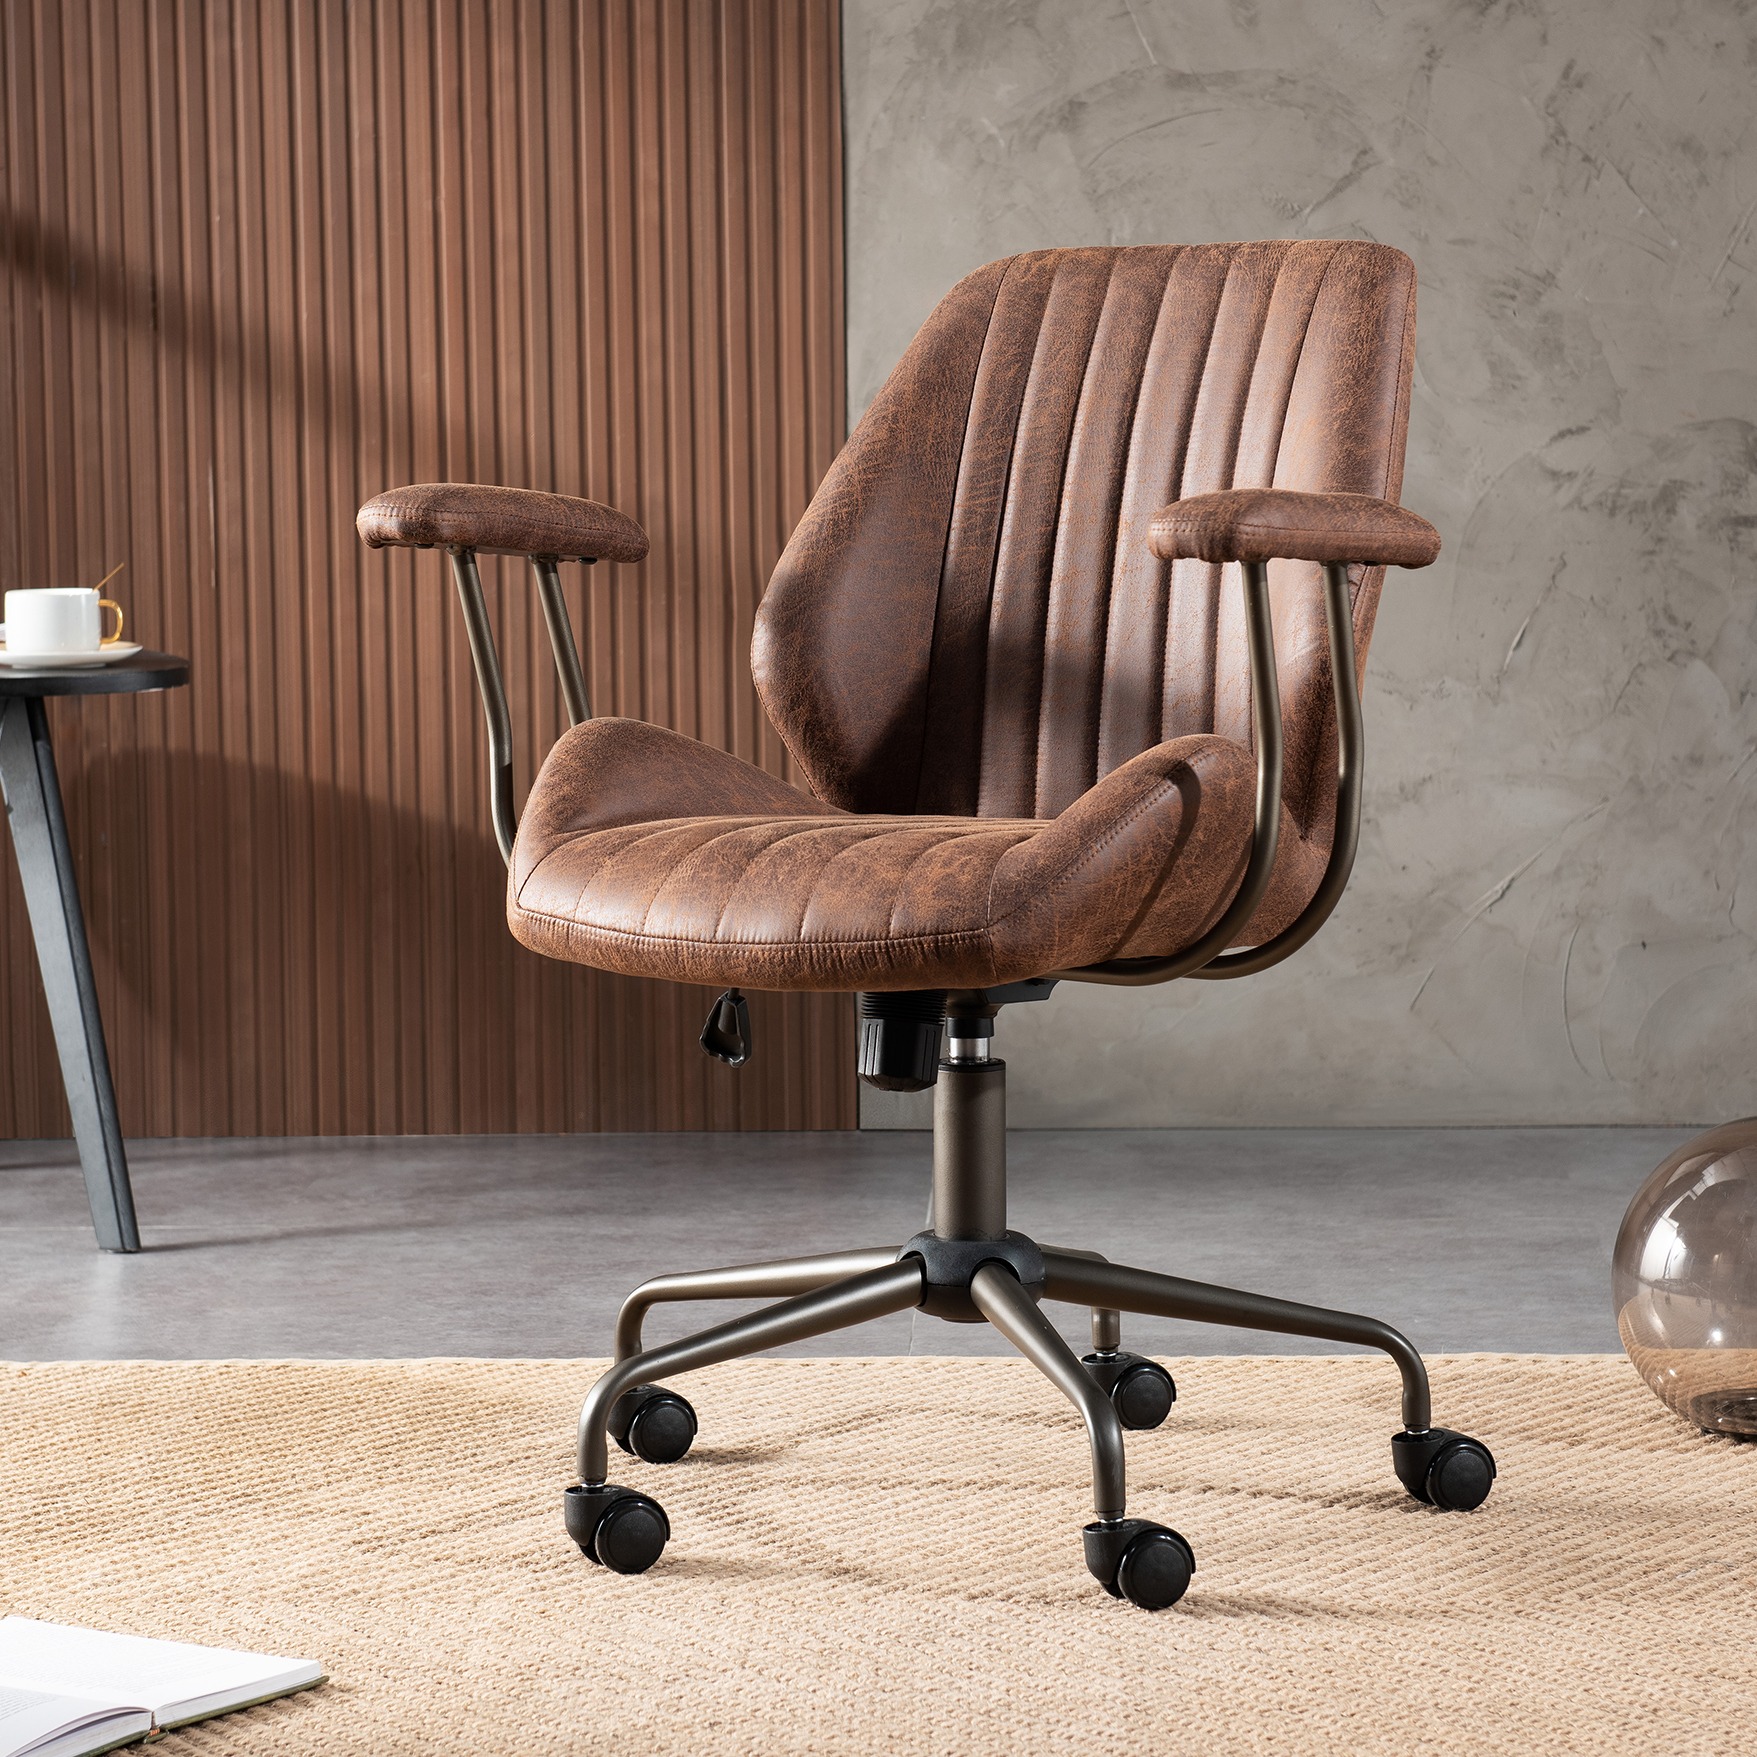 Ovios Ergonomic Office Chair Modern Computer Desk Suede Fabric Desk Chair with Lumbar Support for Home Office - image 2 of 8